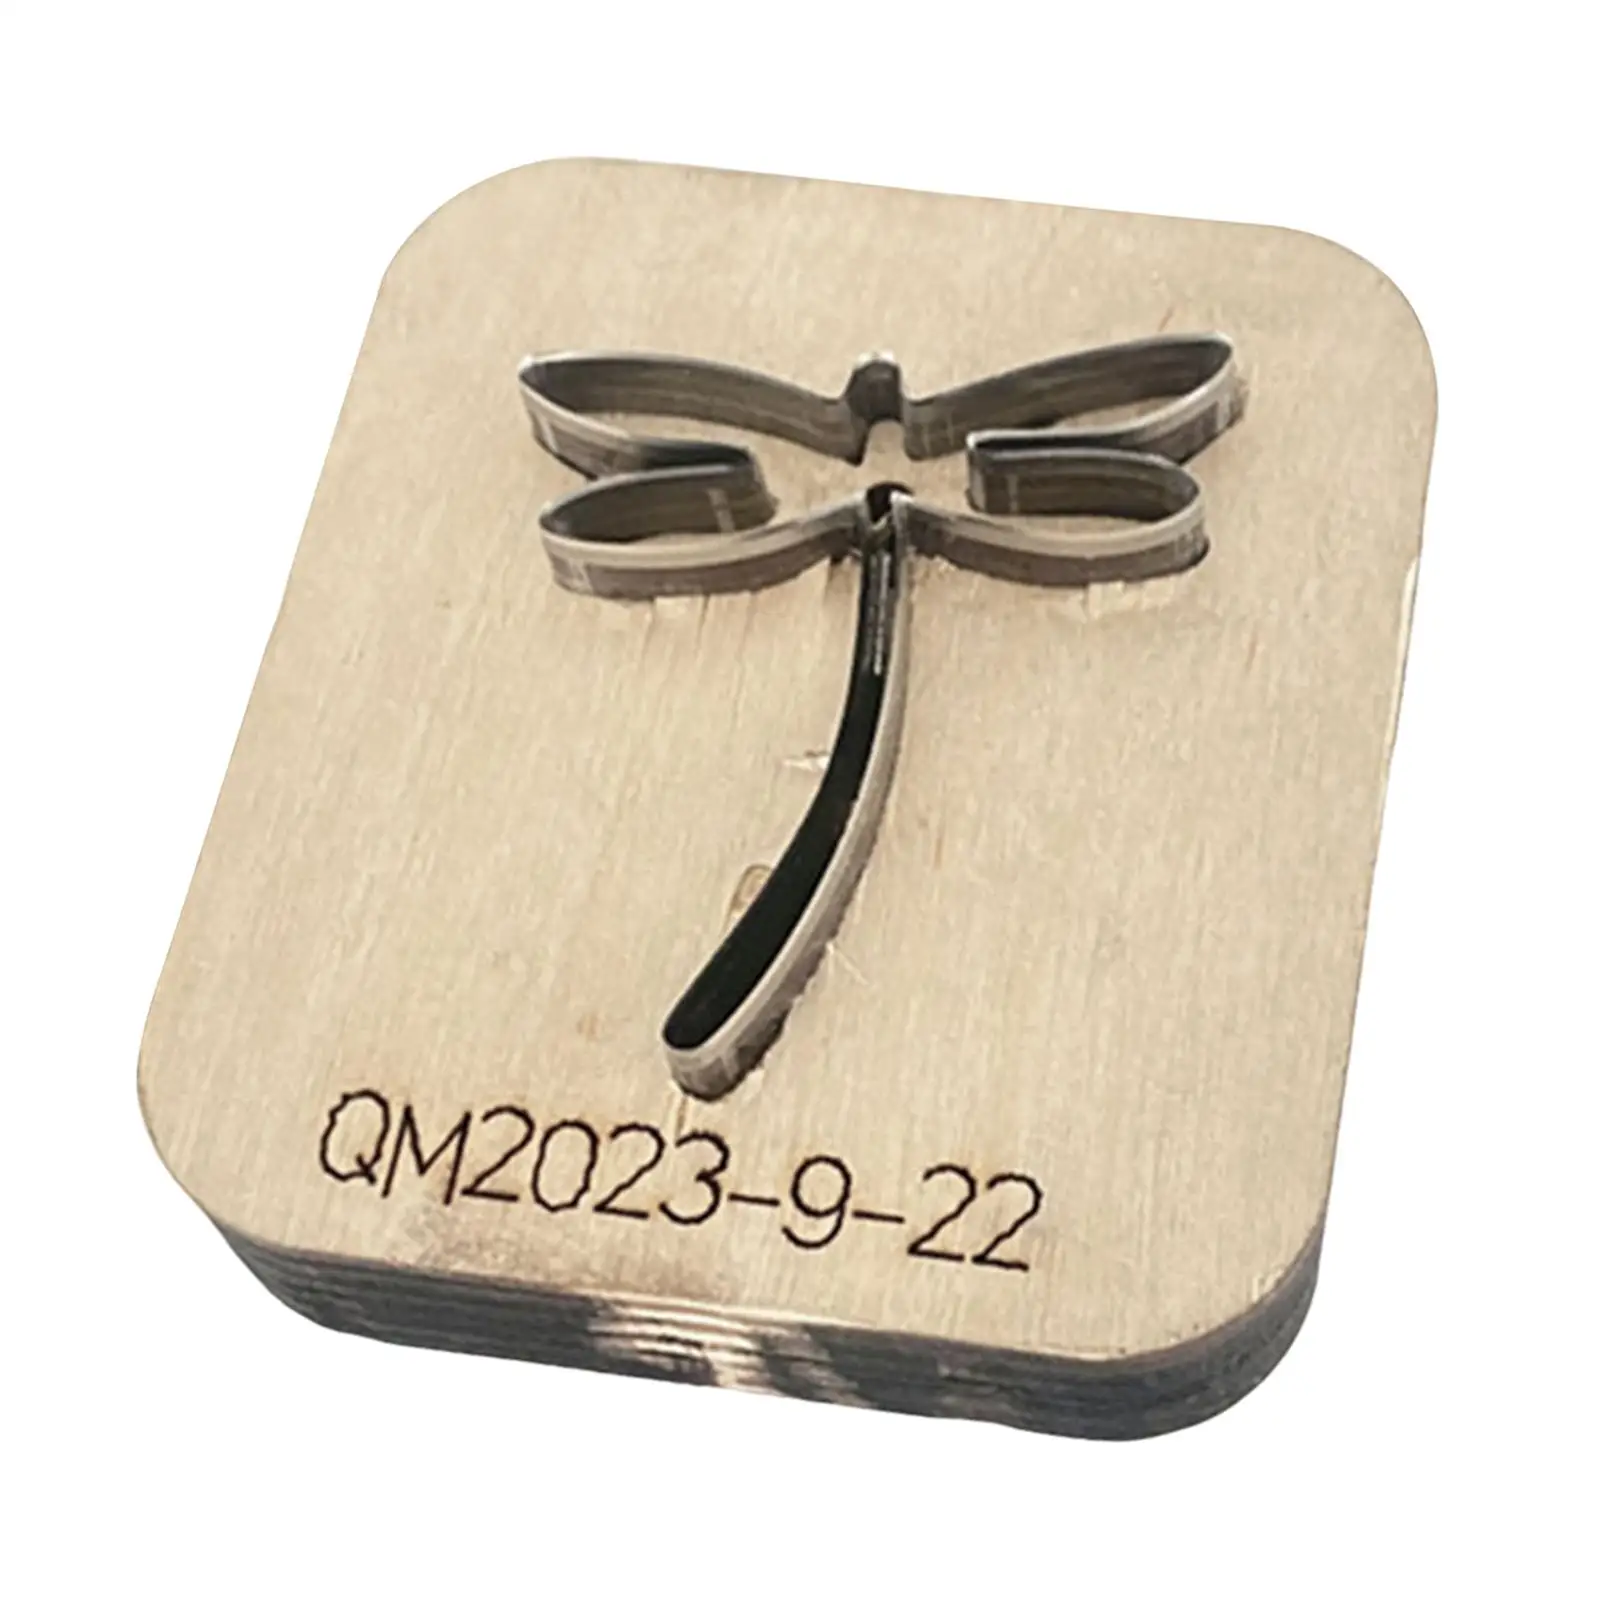 Leather Cut Mould Dragonfly Studio Leather Cutting Template Wooden Punching Stencil Hand Tool Scrapbook Sharp Portable Handcraft